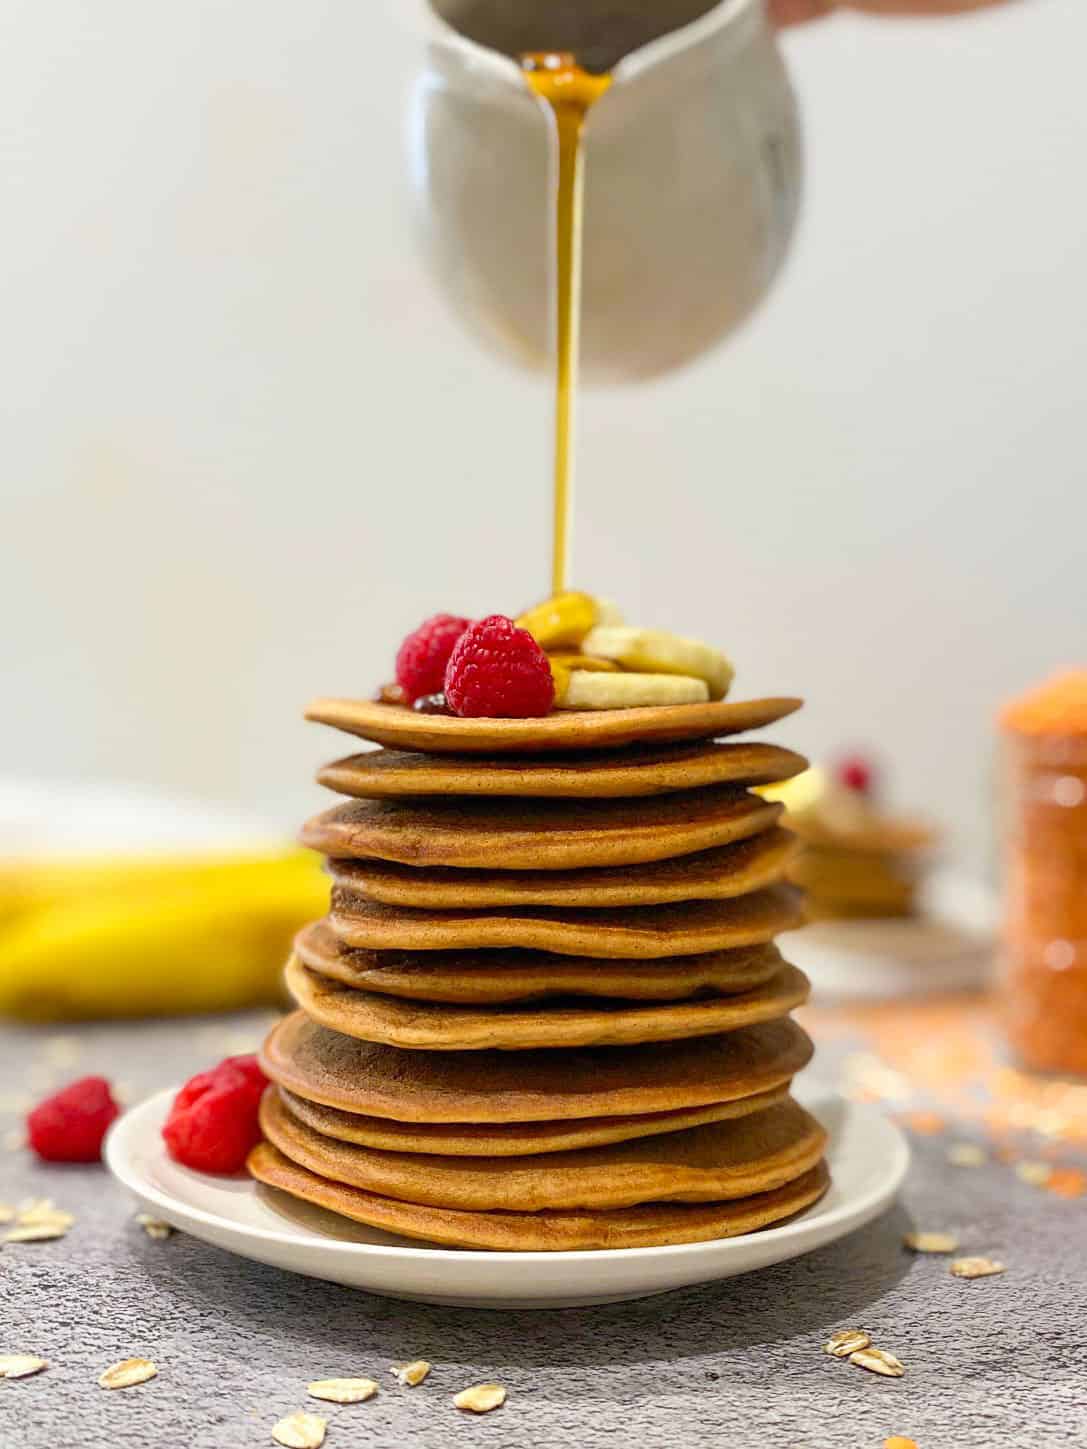 Pouring syrup over stack of pancakes with fruit on top of stack.